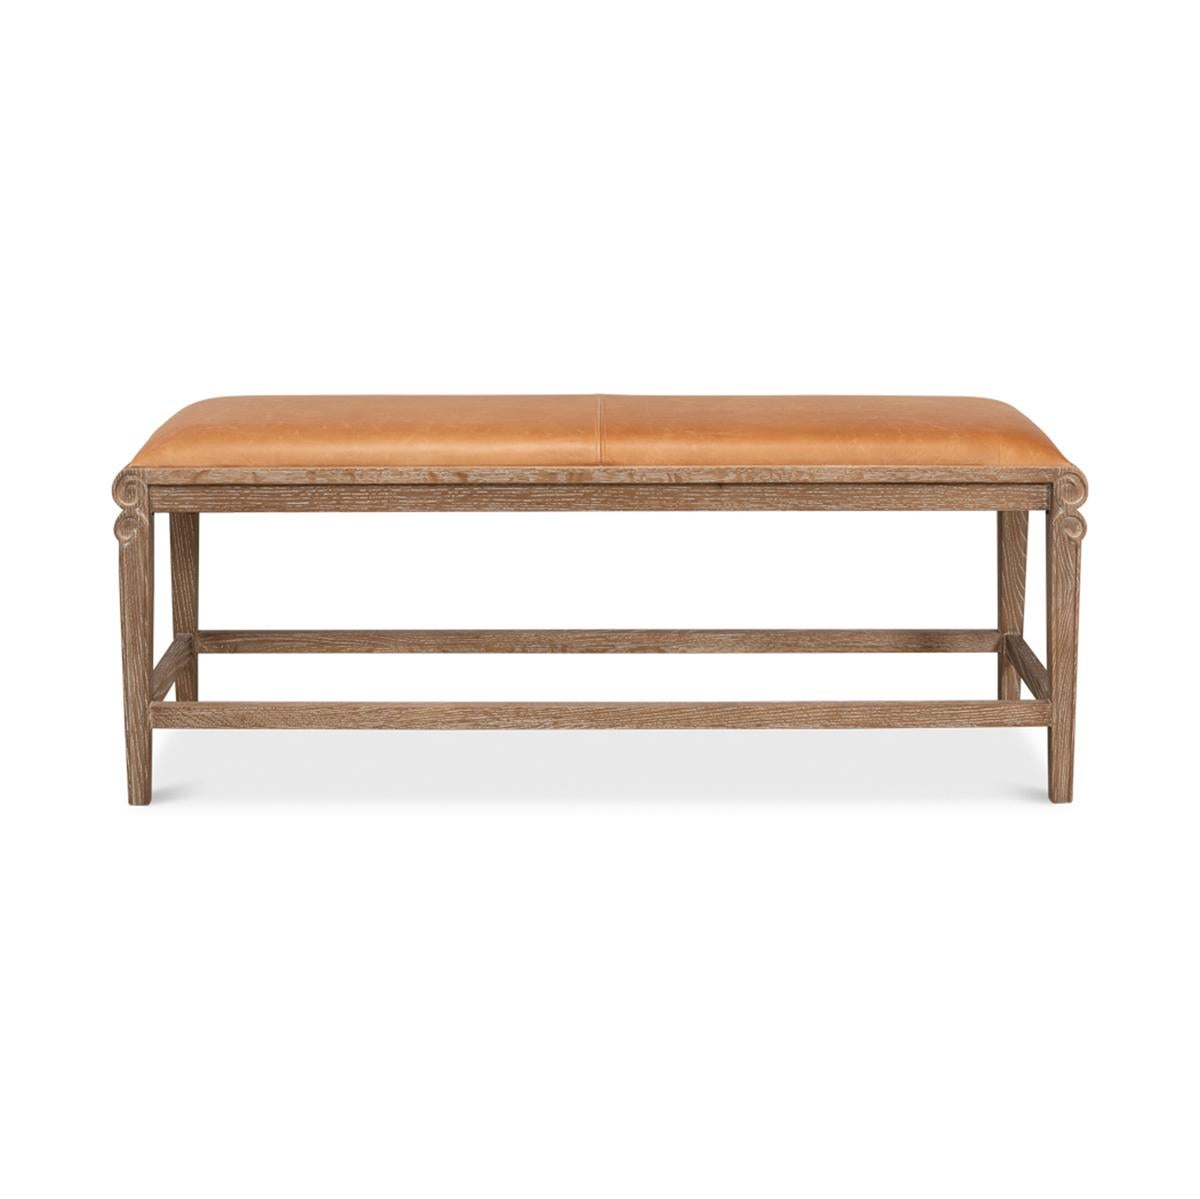 A modern whitewash and leather upholstered bench. This elegant bench has a tan leather cushioned top and sits on a whitewashed oak frame with graceful lines.

Crafted in neutral colors with a versatile design, this bench can easily be enjoyed in any